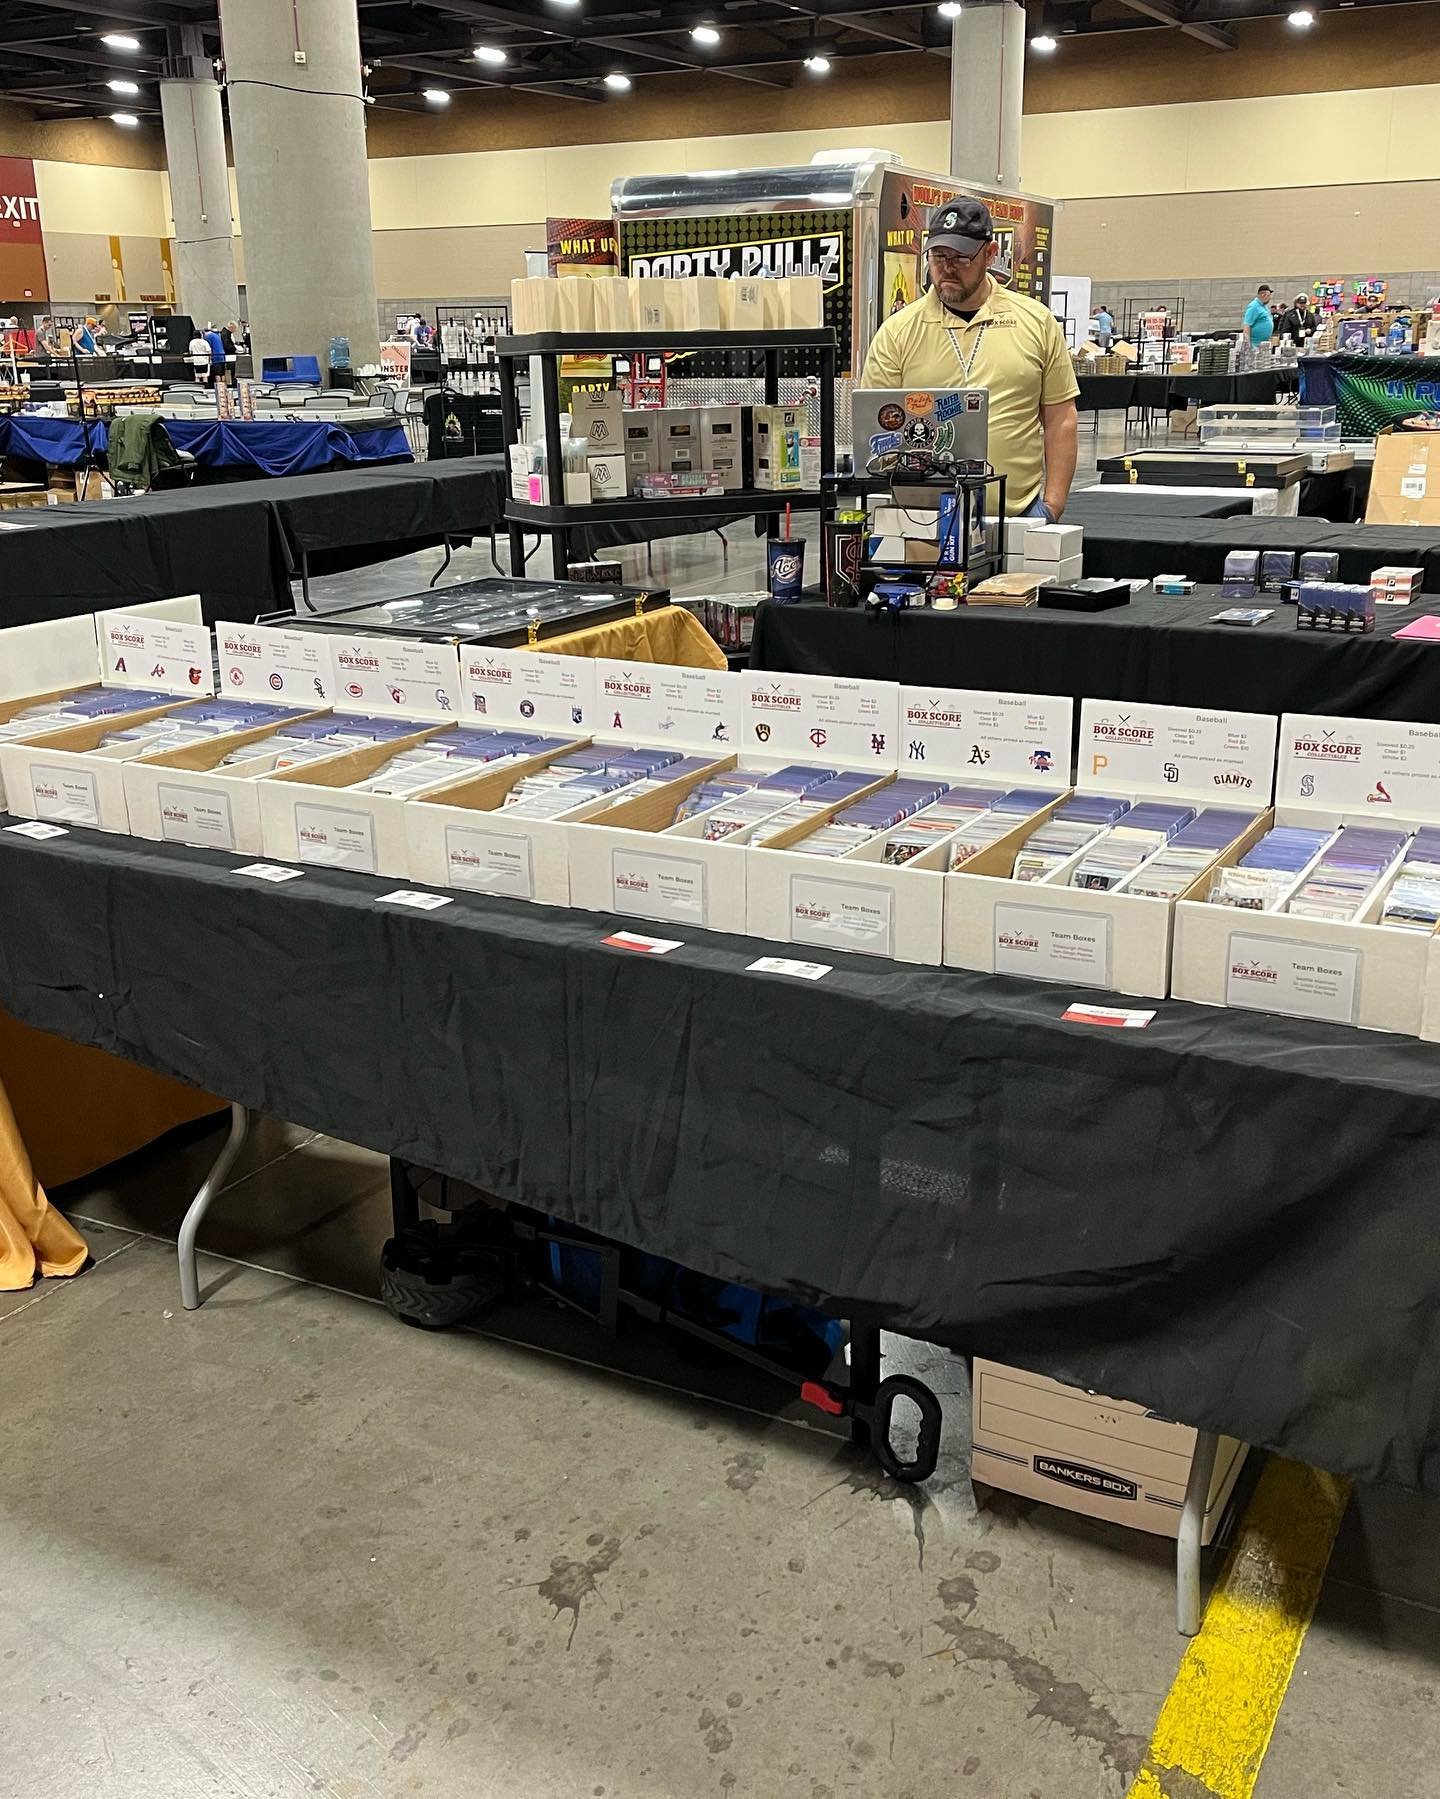 The setup before the show on Day 2. It was another great day! Moved a lot of product, met some more great people and had a lot of fun! Tomorrow is the 3rd and final day!

If you&rsquo;re in the Phoenix area come out to the show and say hi. We are in 